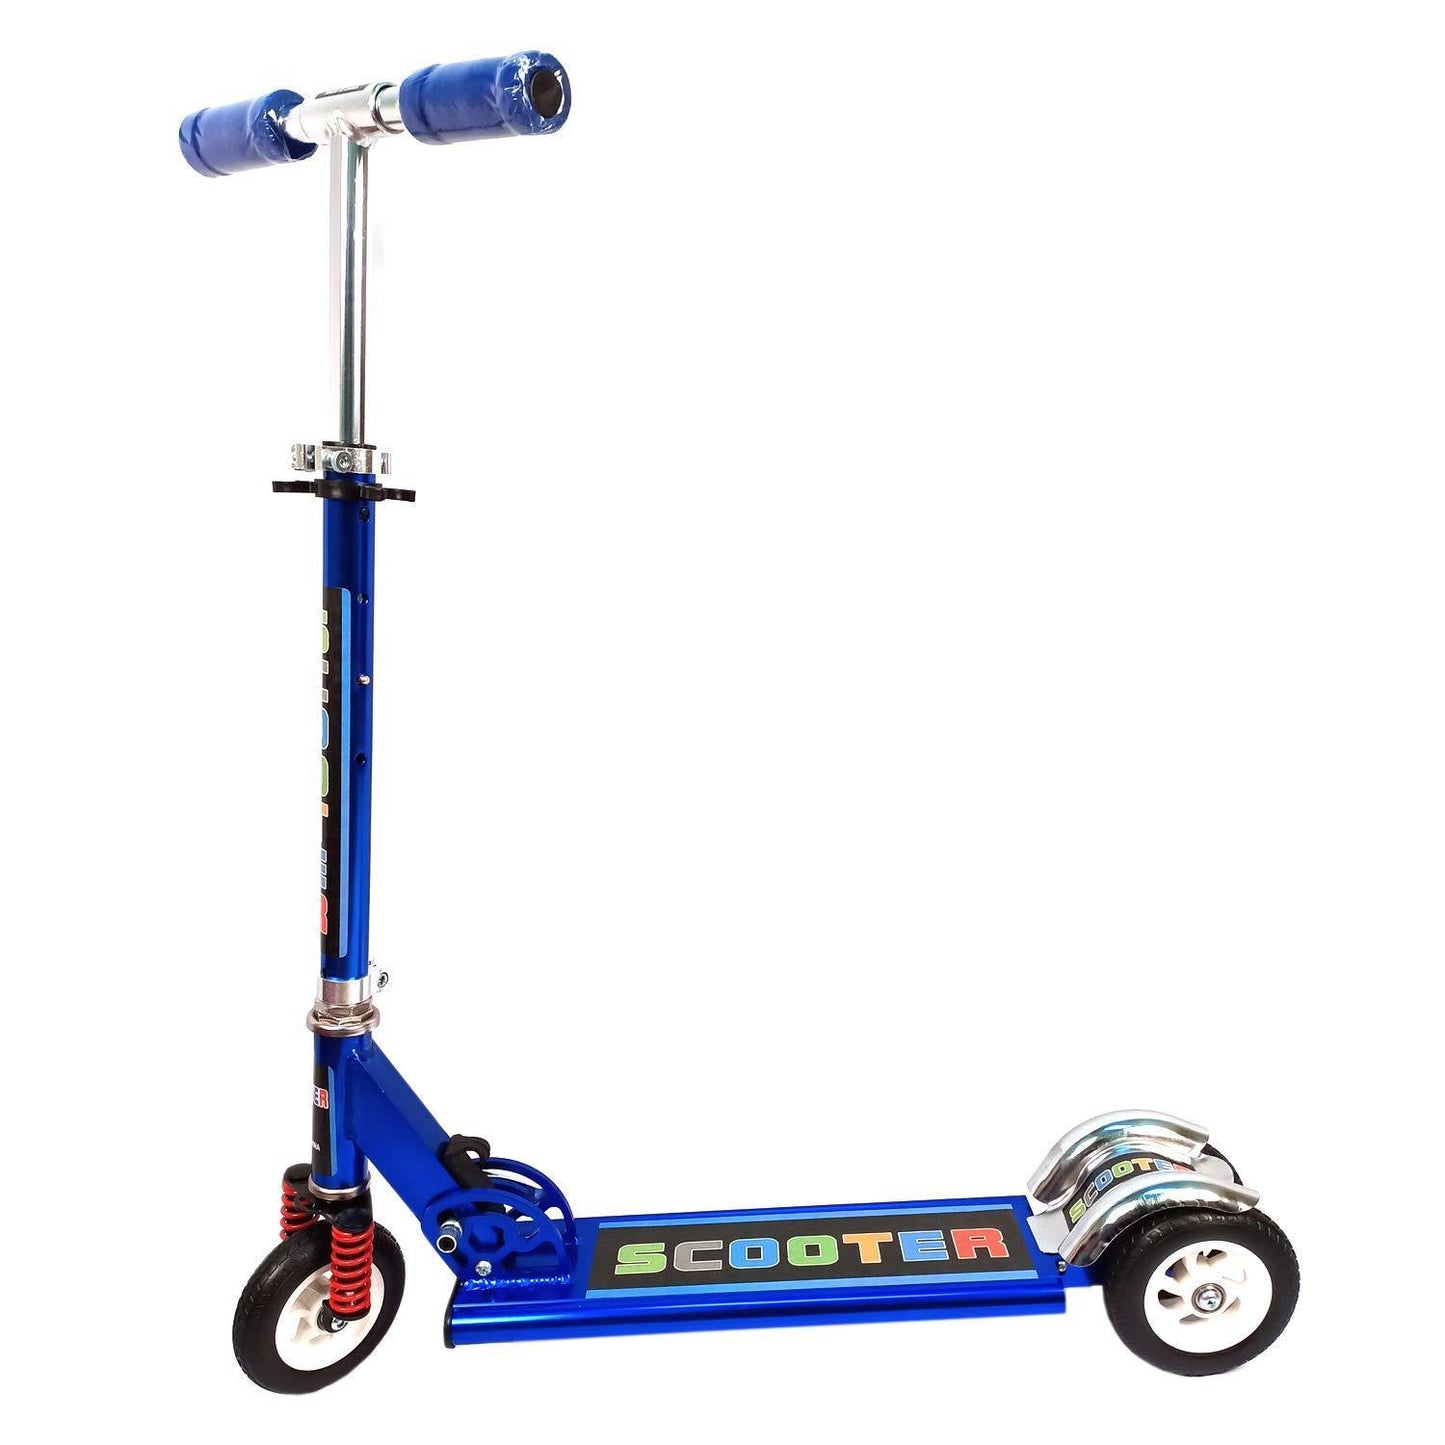 Prokick 3 Scooter for Kids of 3 to 14 Years Blue - Best Price online Prokicksports.com